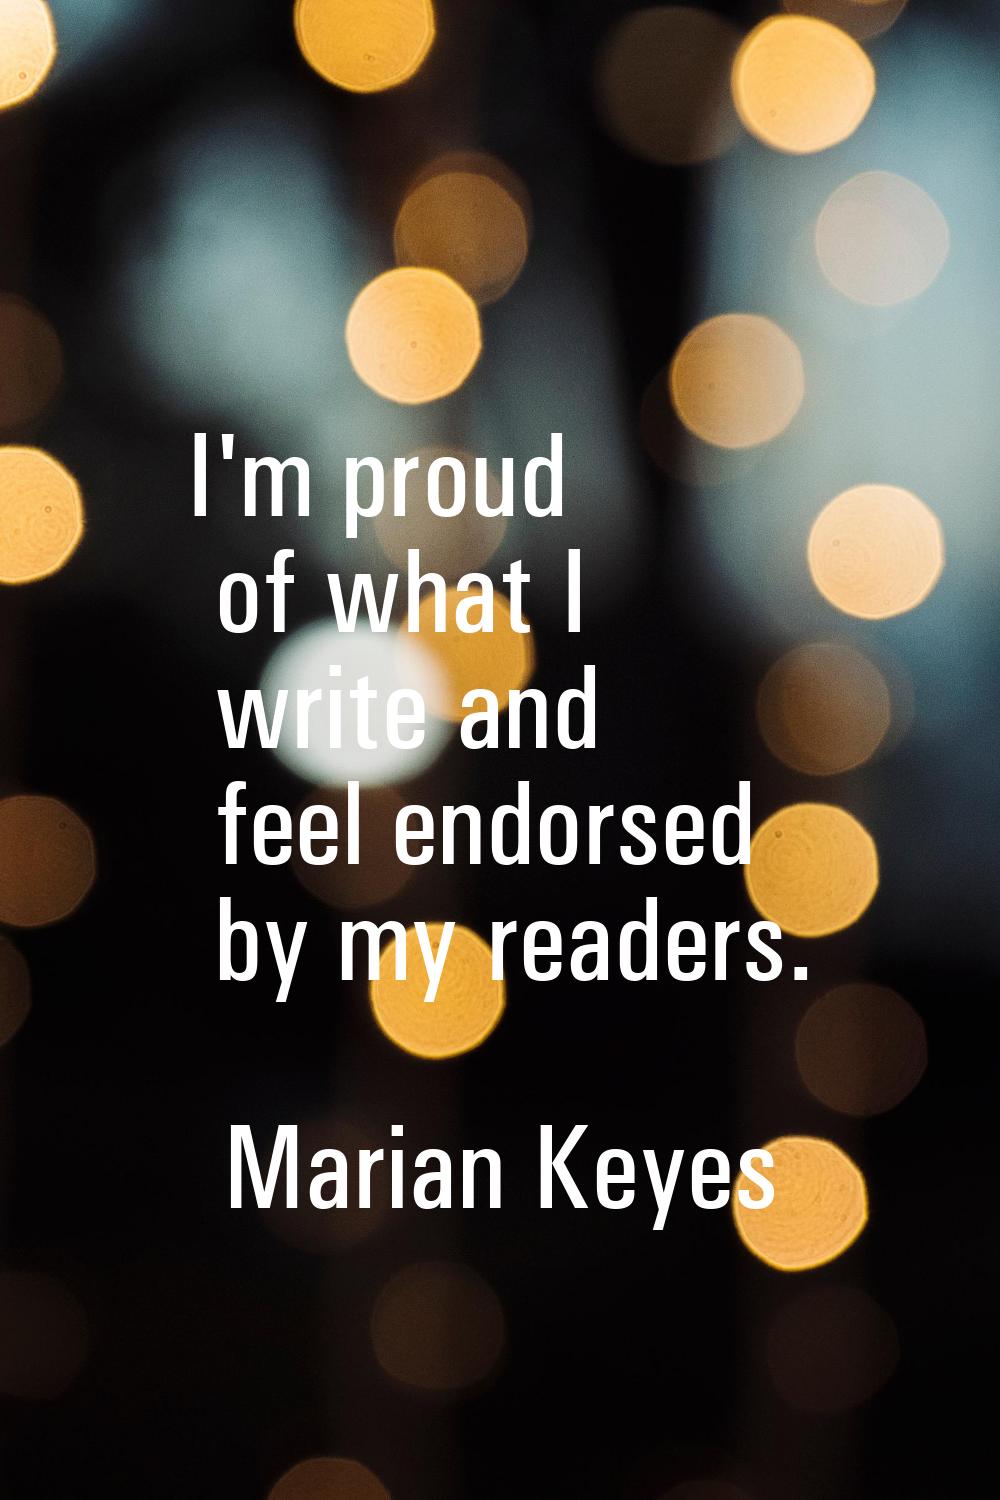 I'm proud of what I write and feel endorsed by my readers.